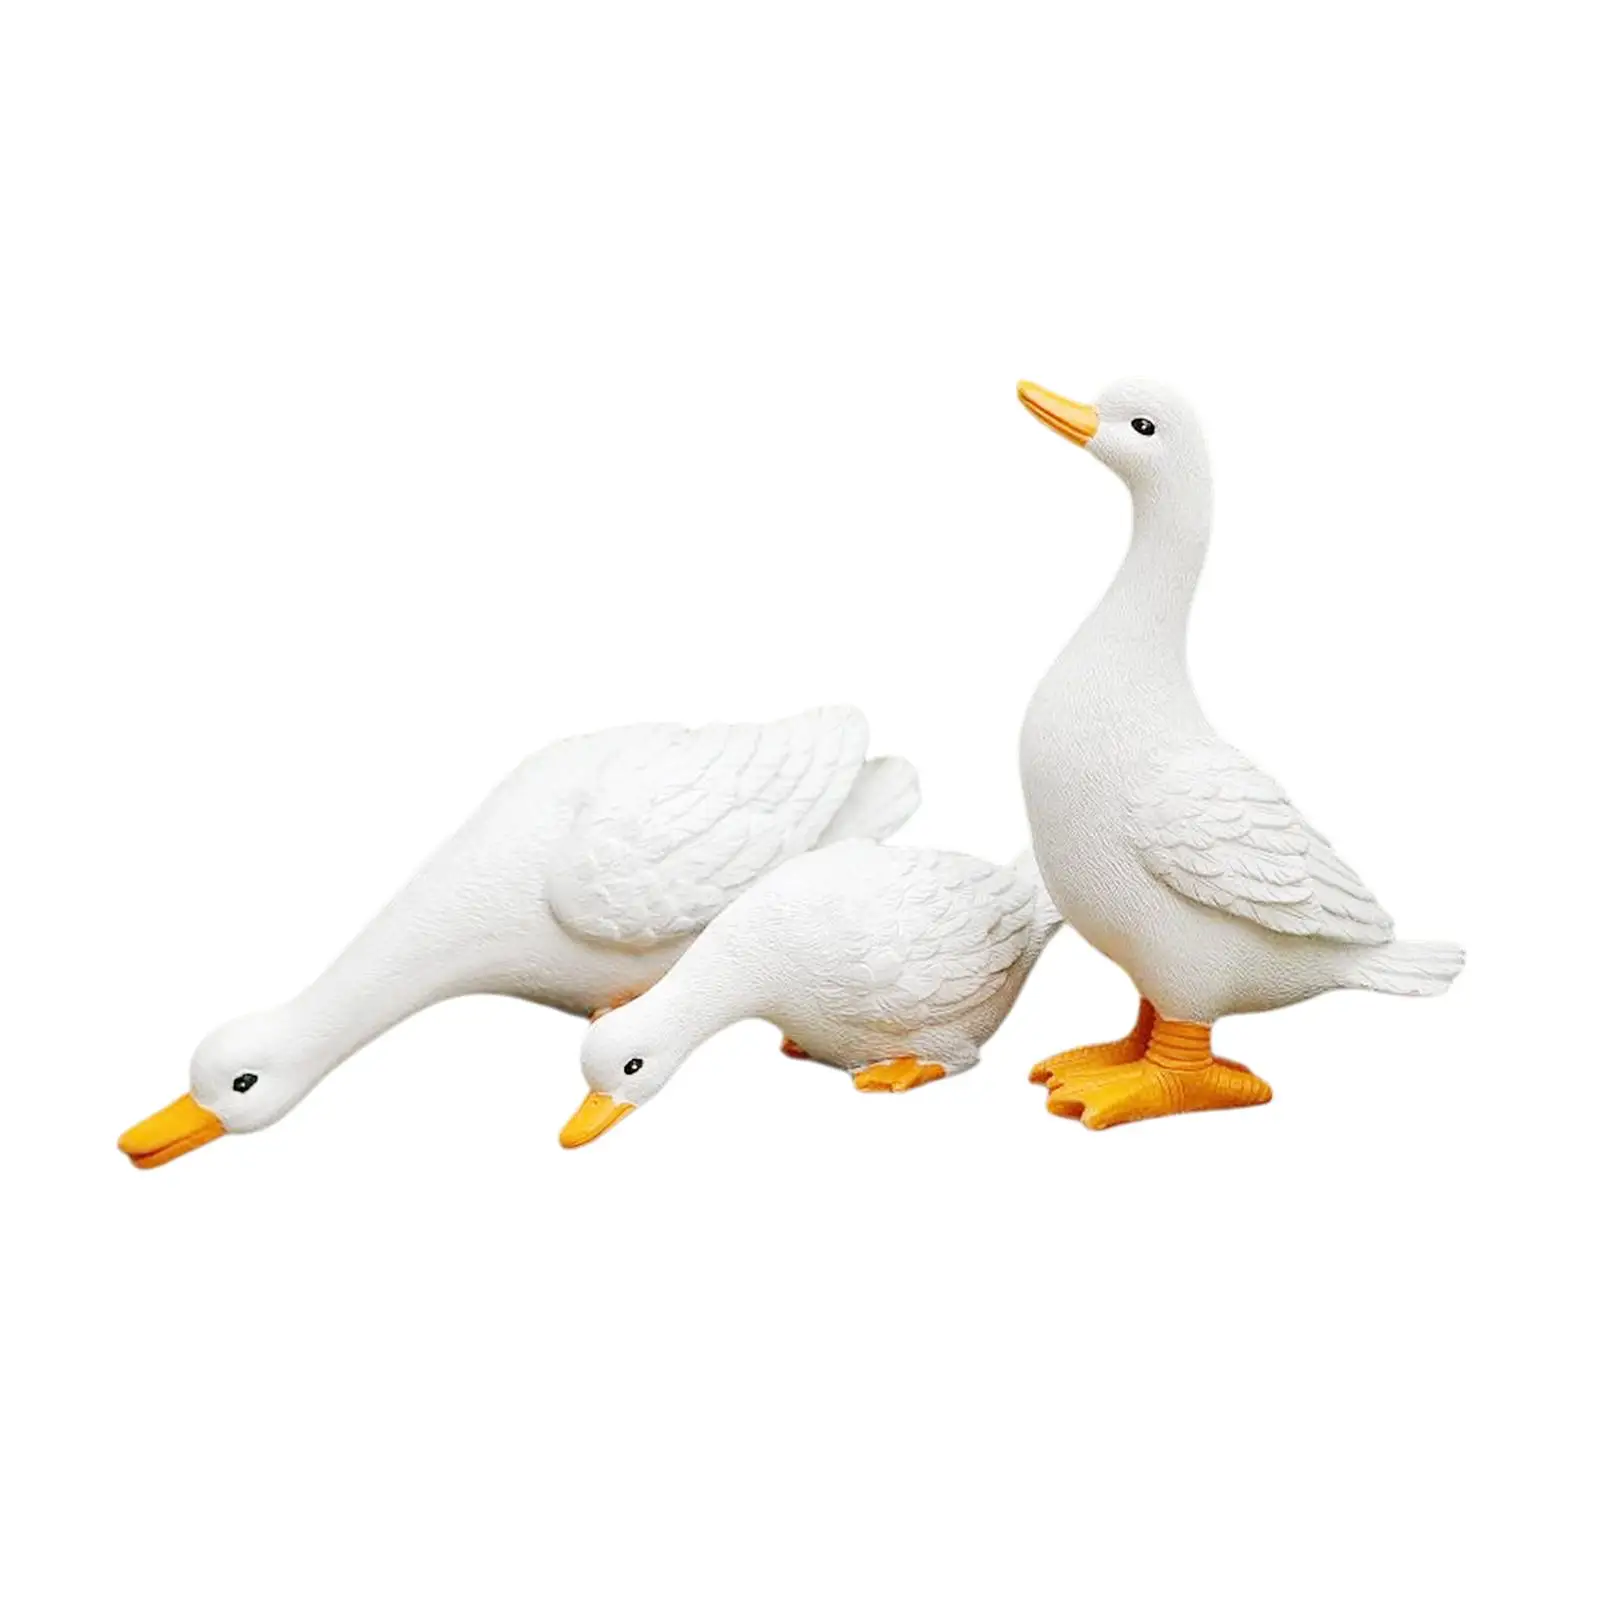 3x Resin Duck Figures Ornaments Yard Decoration for Patio Balcony Courtyard